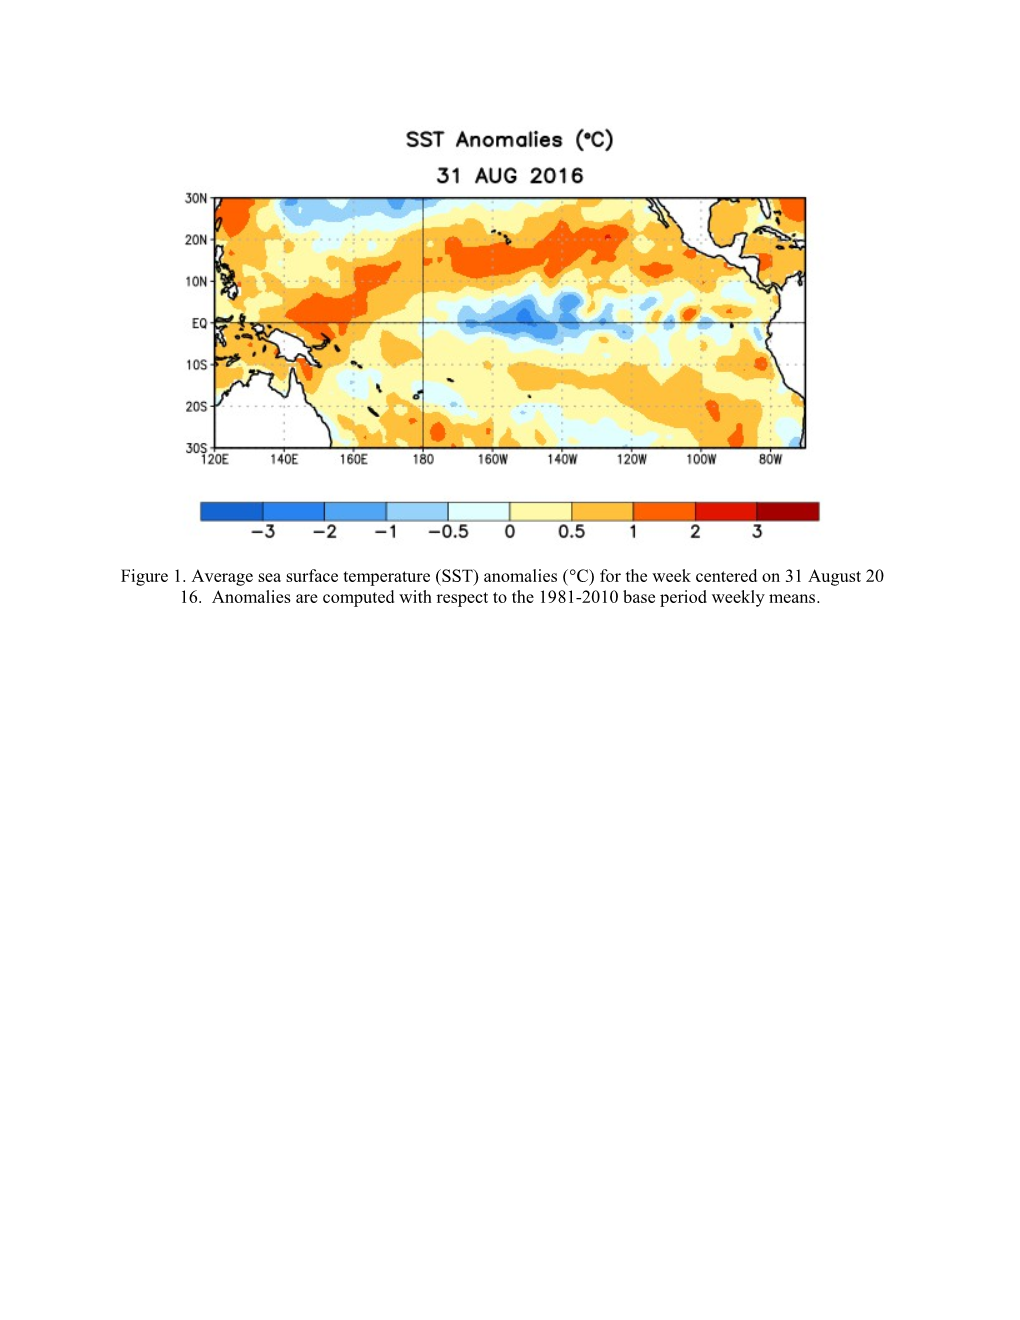 Synopsis: ENSO-Neutral Conditions May Transition to La Niña Co s1